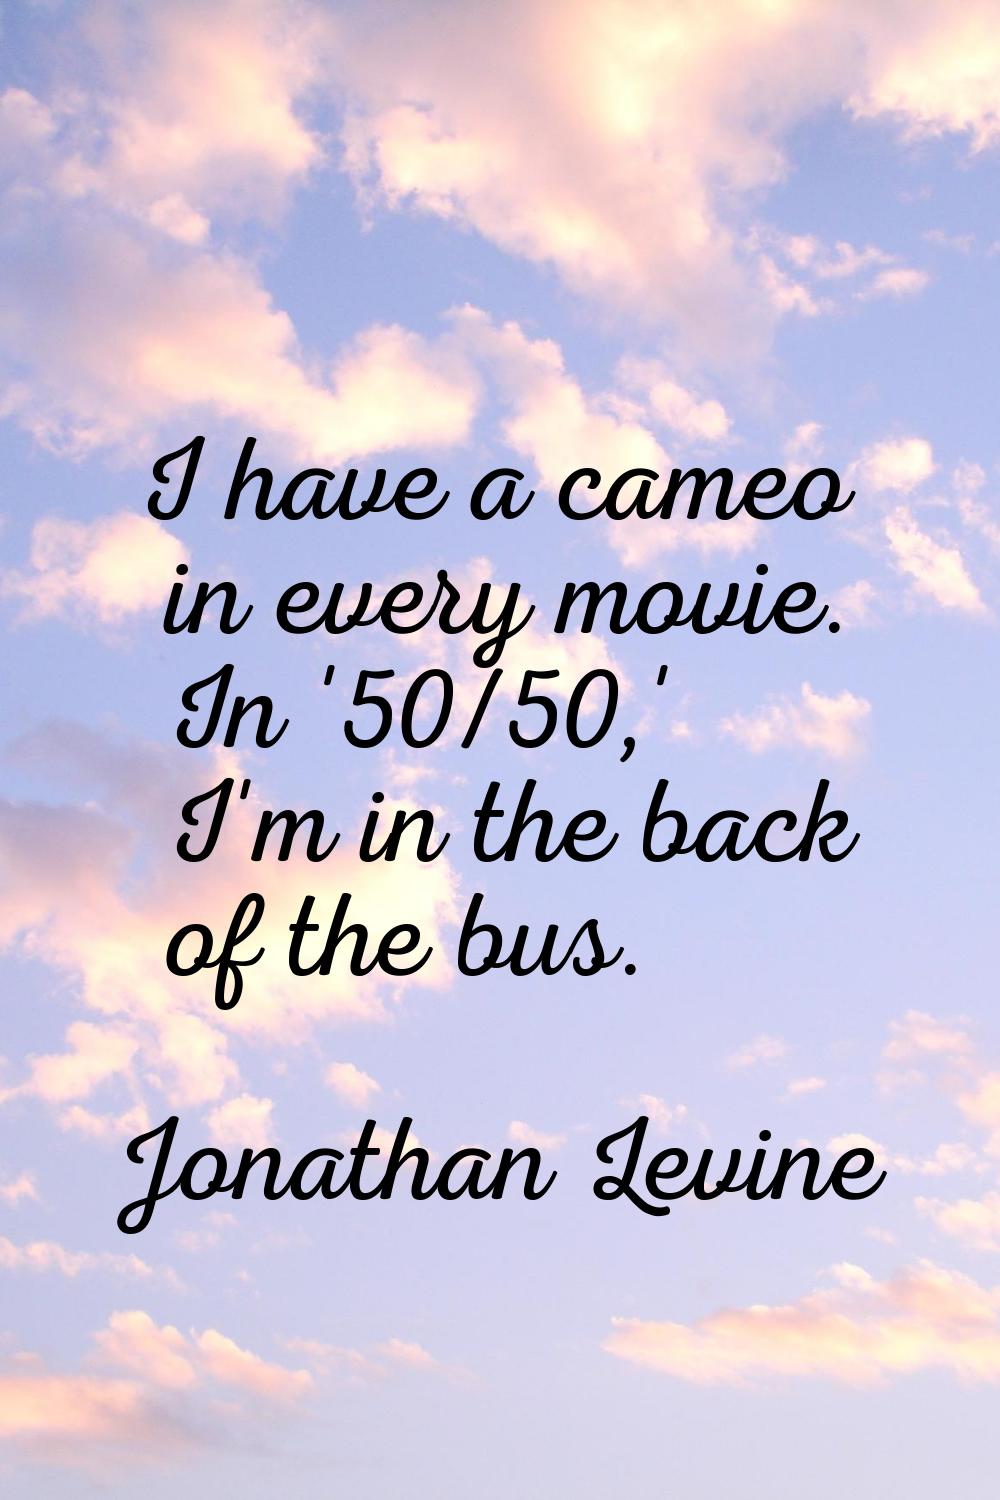 I have a cameo in every movie. In '50/50,' I'm in the back of the bus.